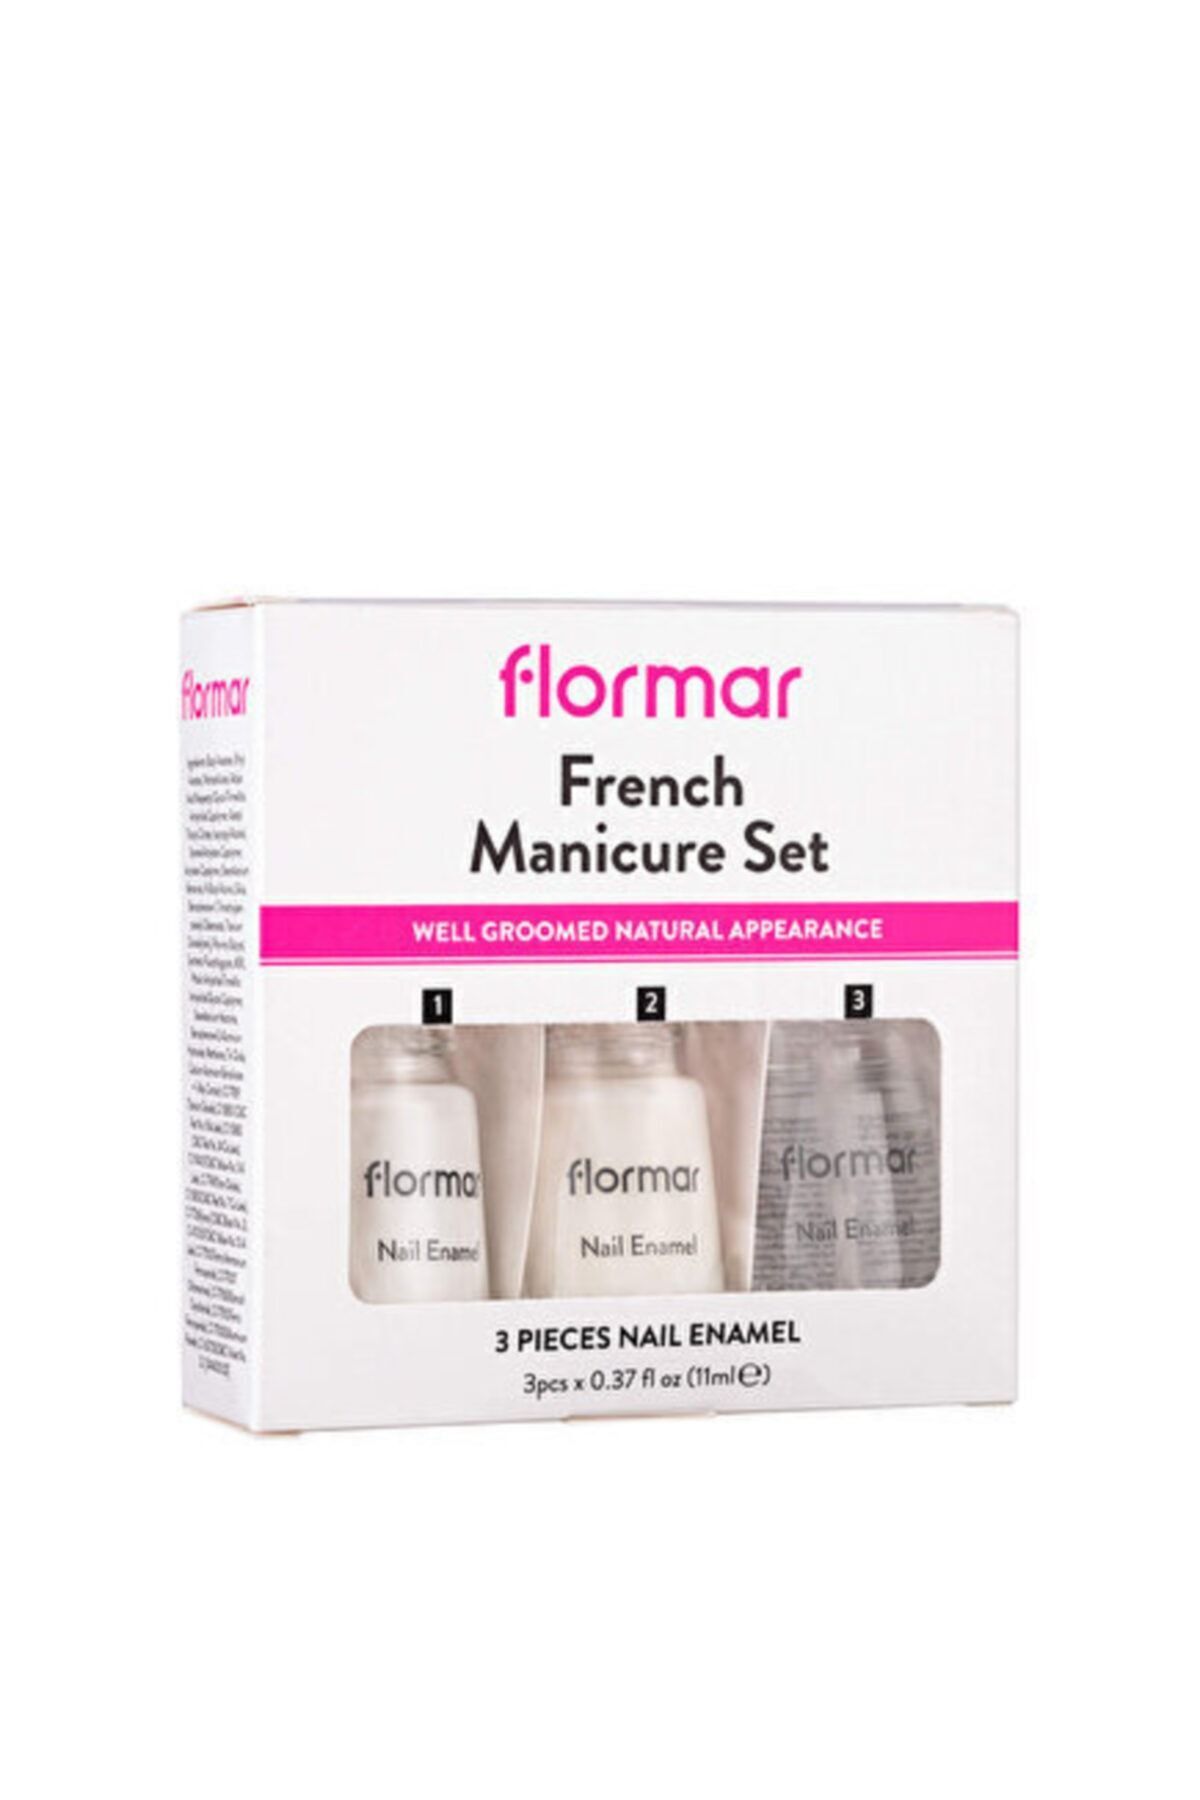 Flormar FRENCH MANICURE SET - 227